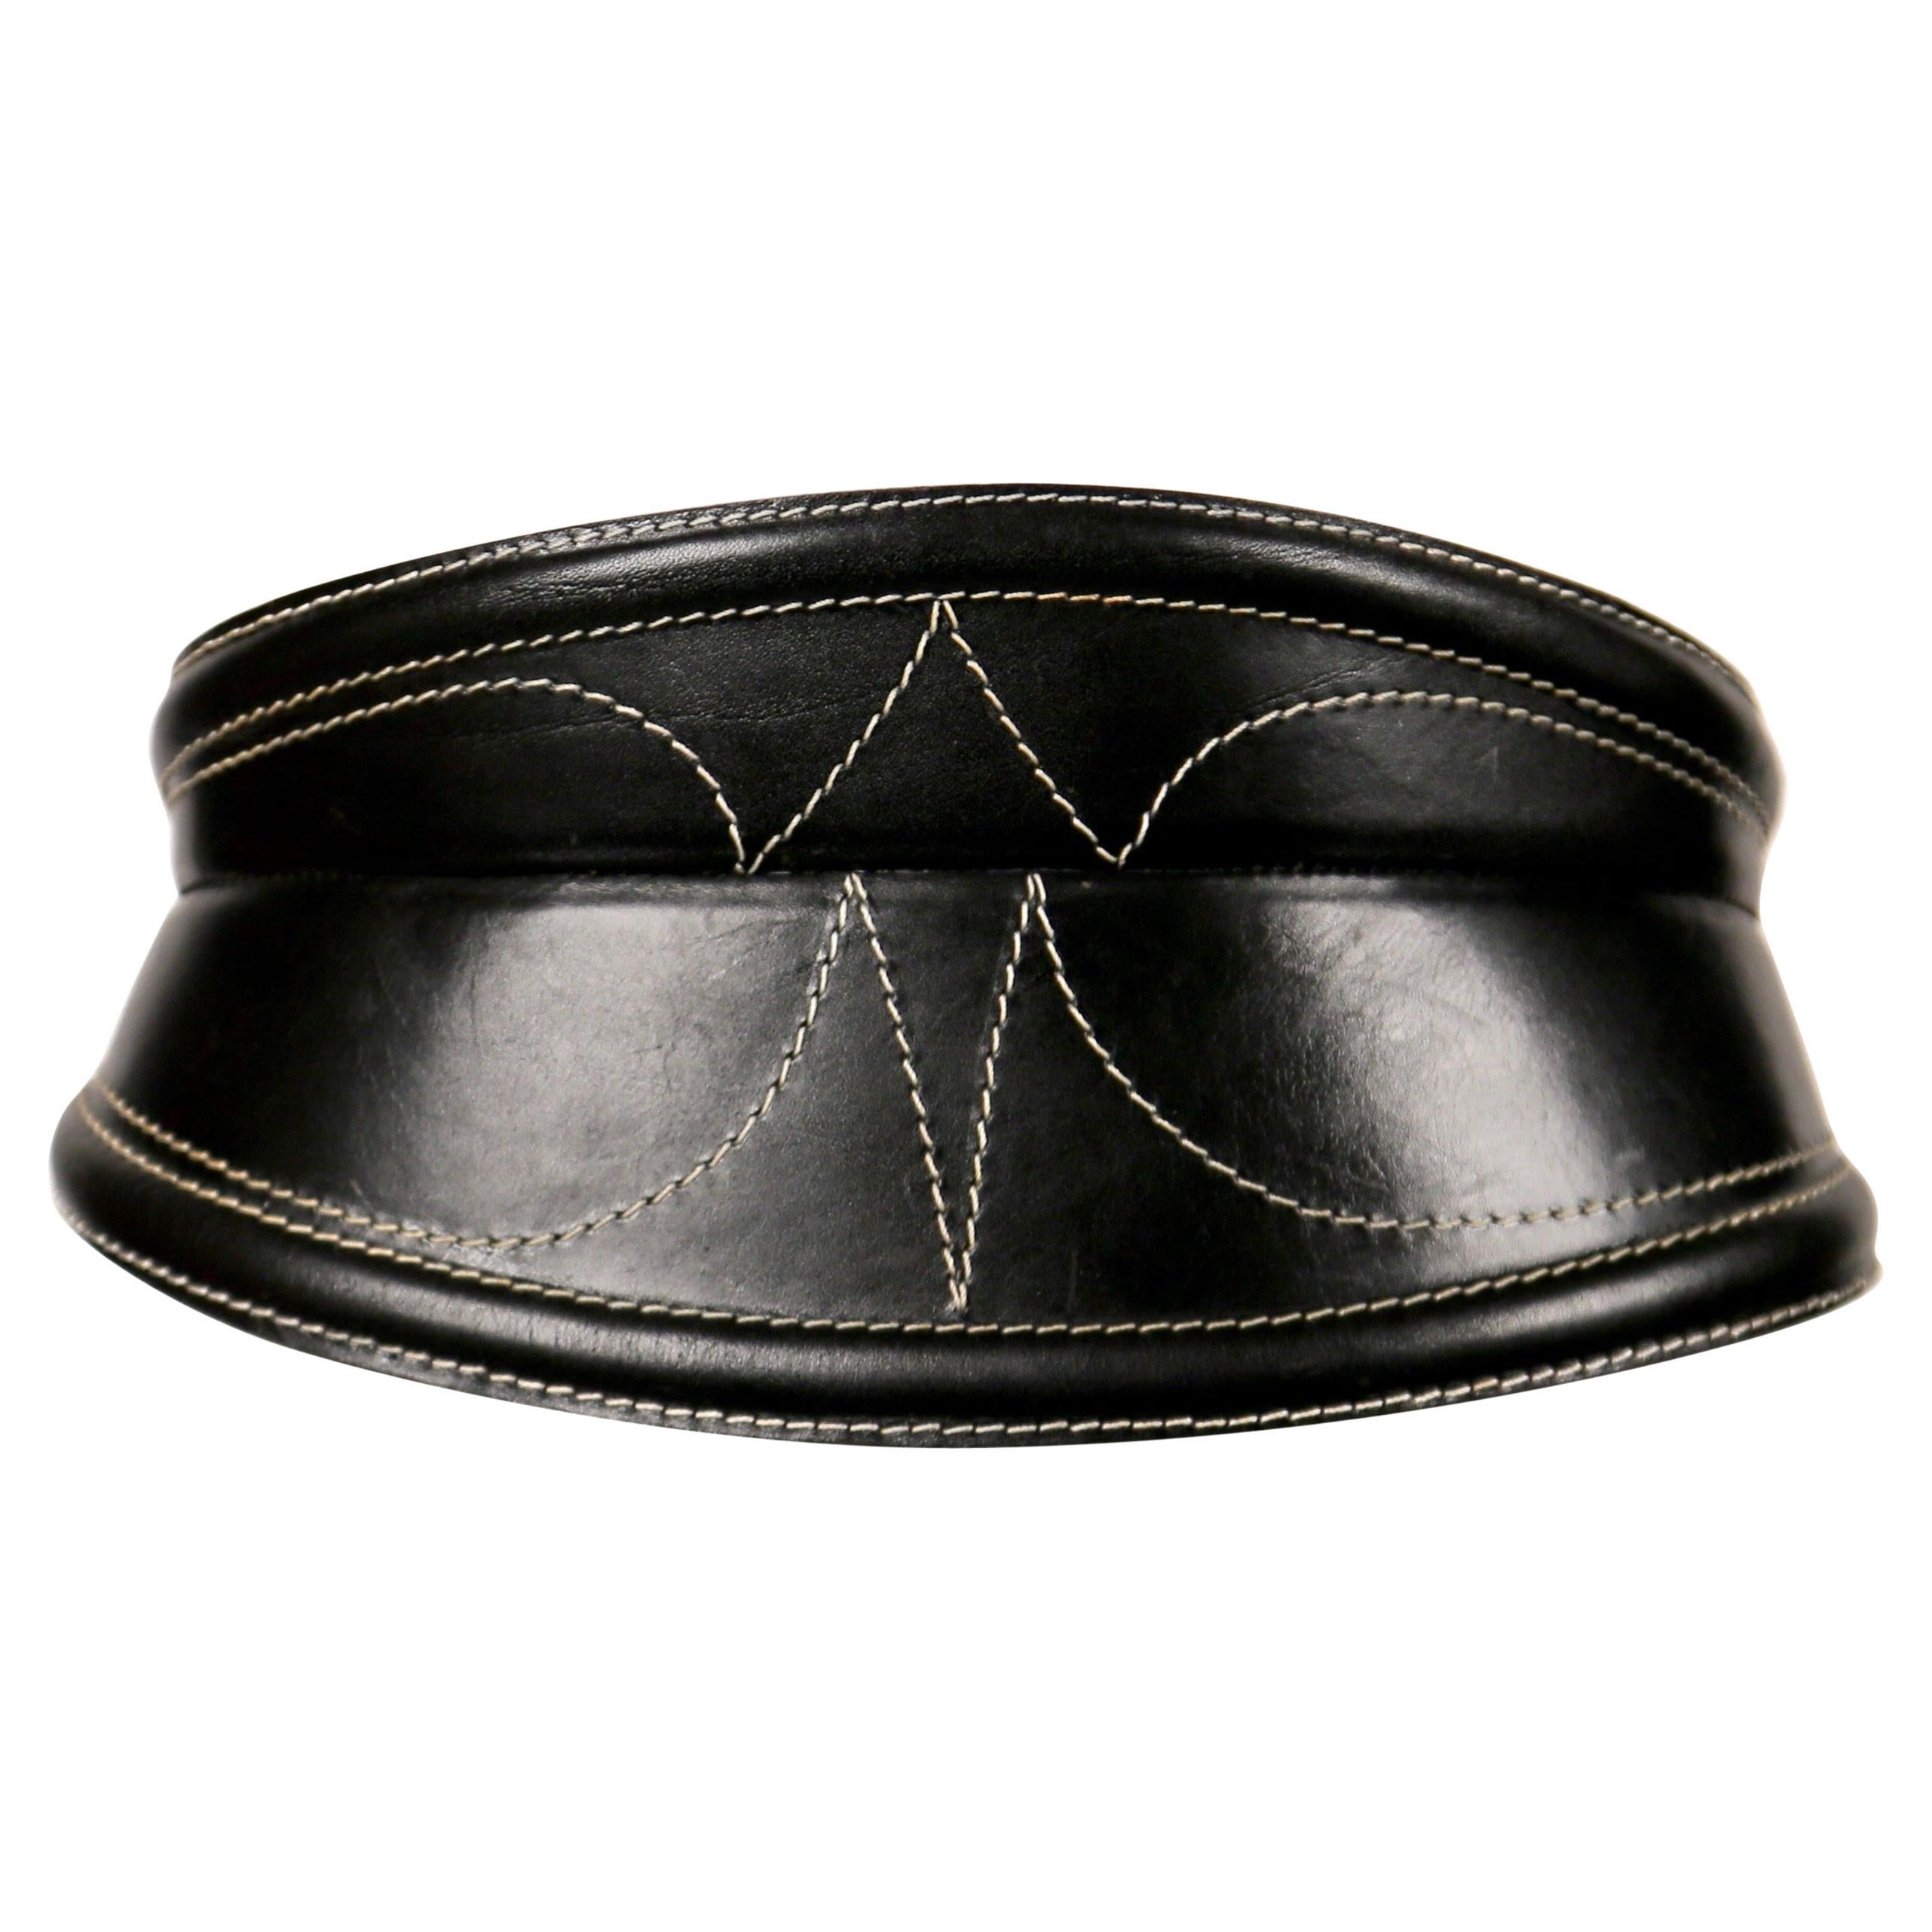 1980's GIANFRANCO FERRE wide black leather belt with top-stitching For Sale